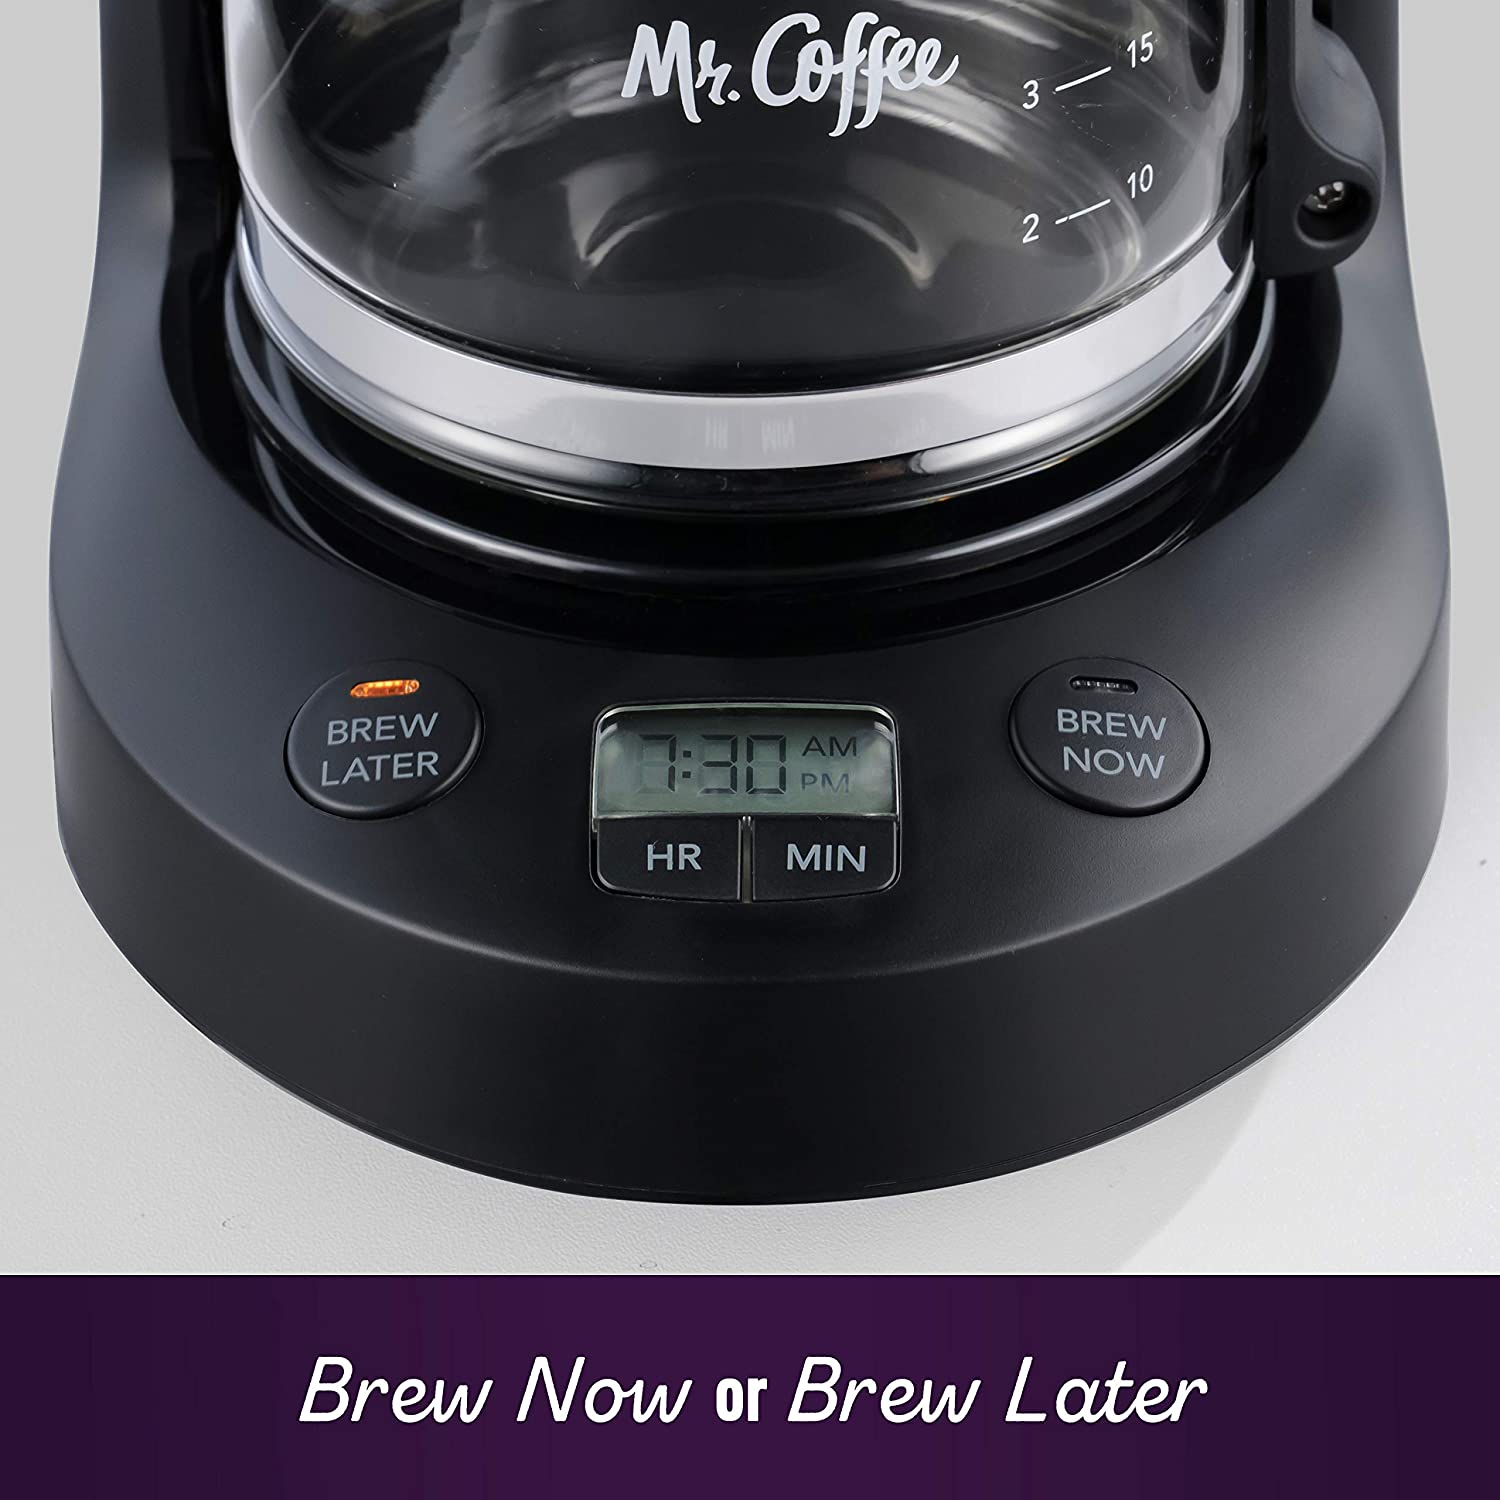 Mr. Coffee 5 Cup Programmable 25 oz. Mini, Brew Now or Later, Coffee Maker, Black - image 2 of 5